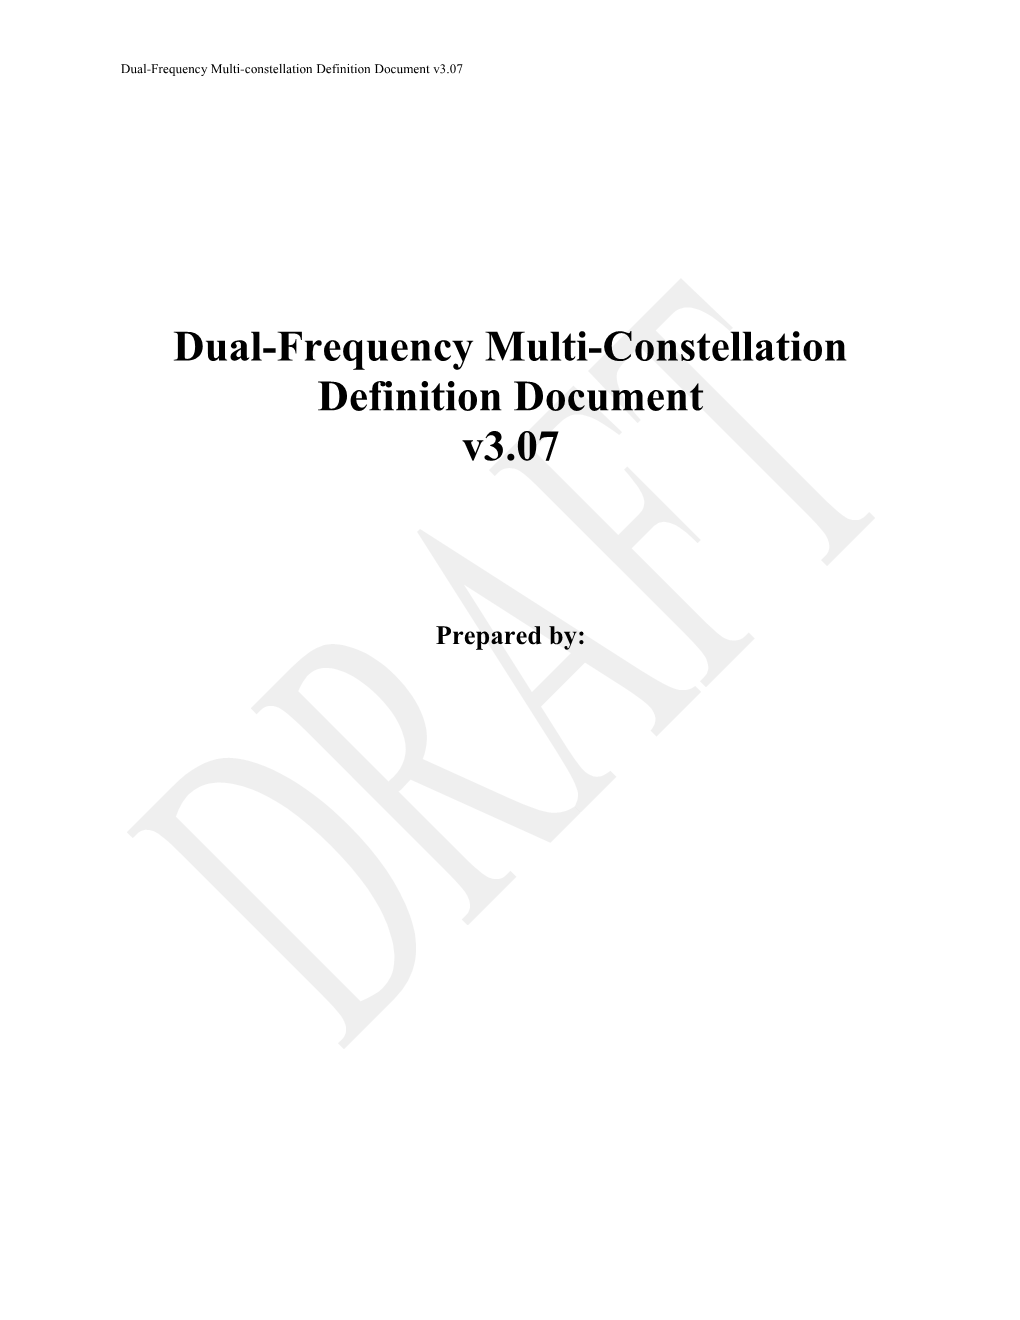 Dual-Frequency Multi-Constellation Definition Document